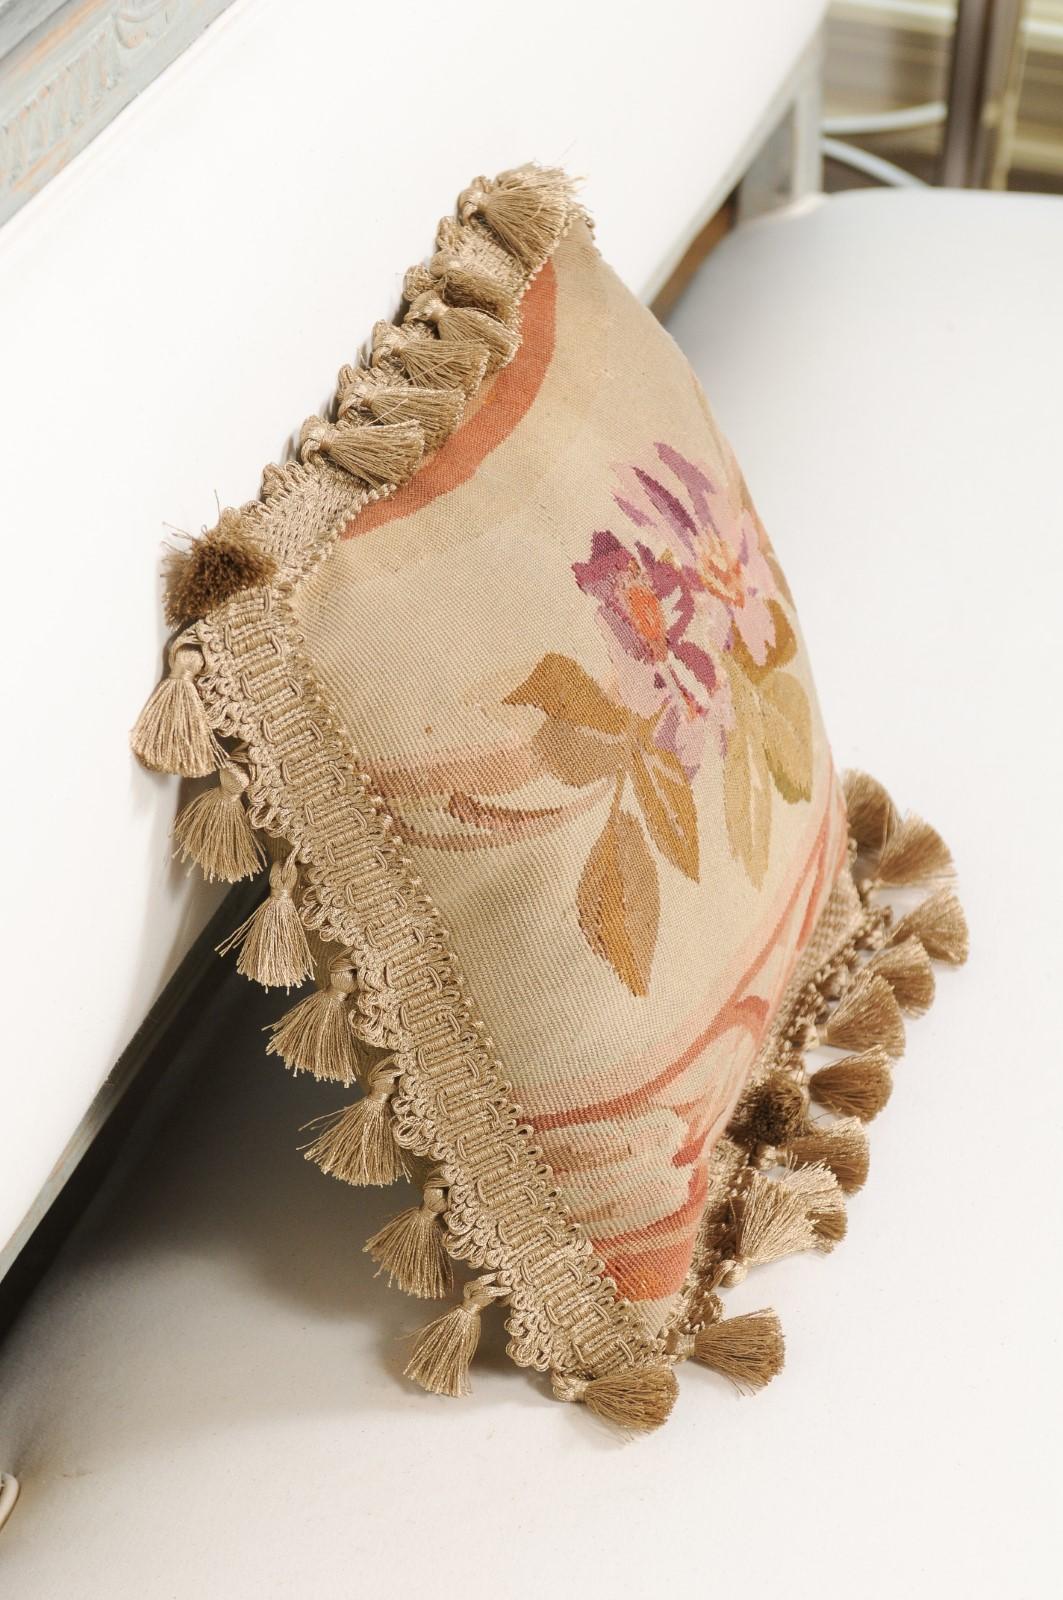 19th Century French Aubusson Tapestry Pillow with Purple Flowers and Tassels For Sale 4